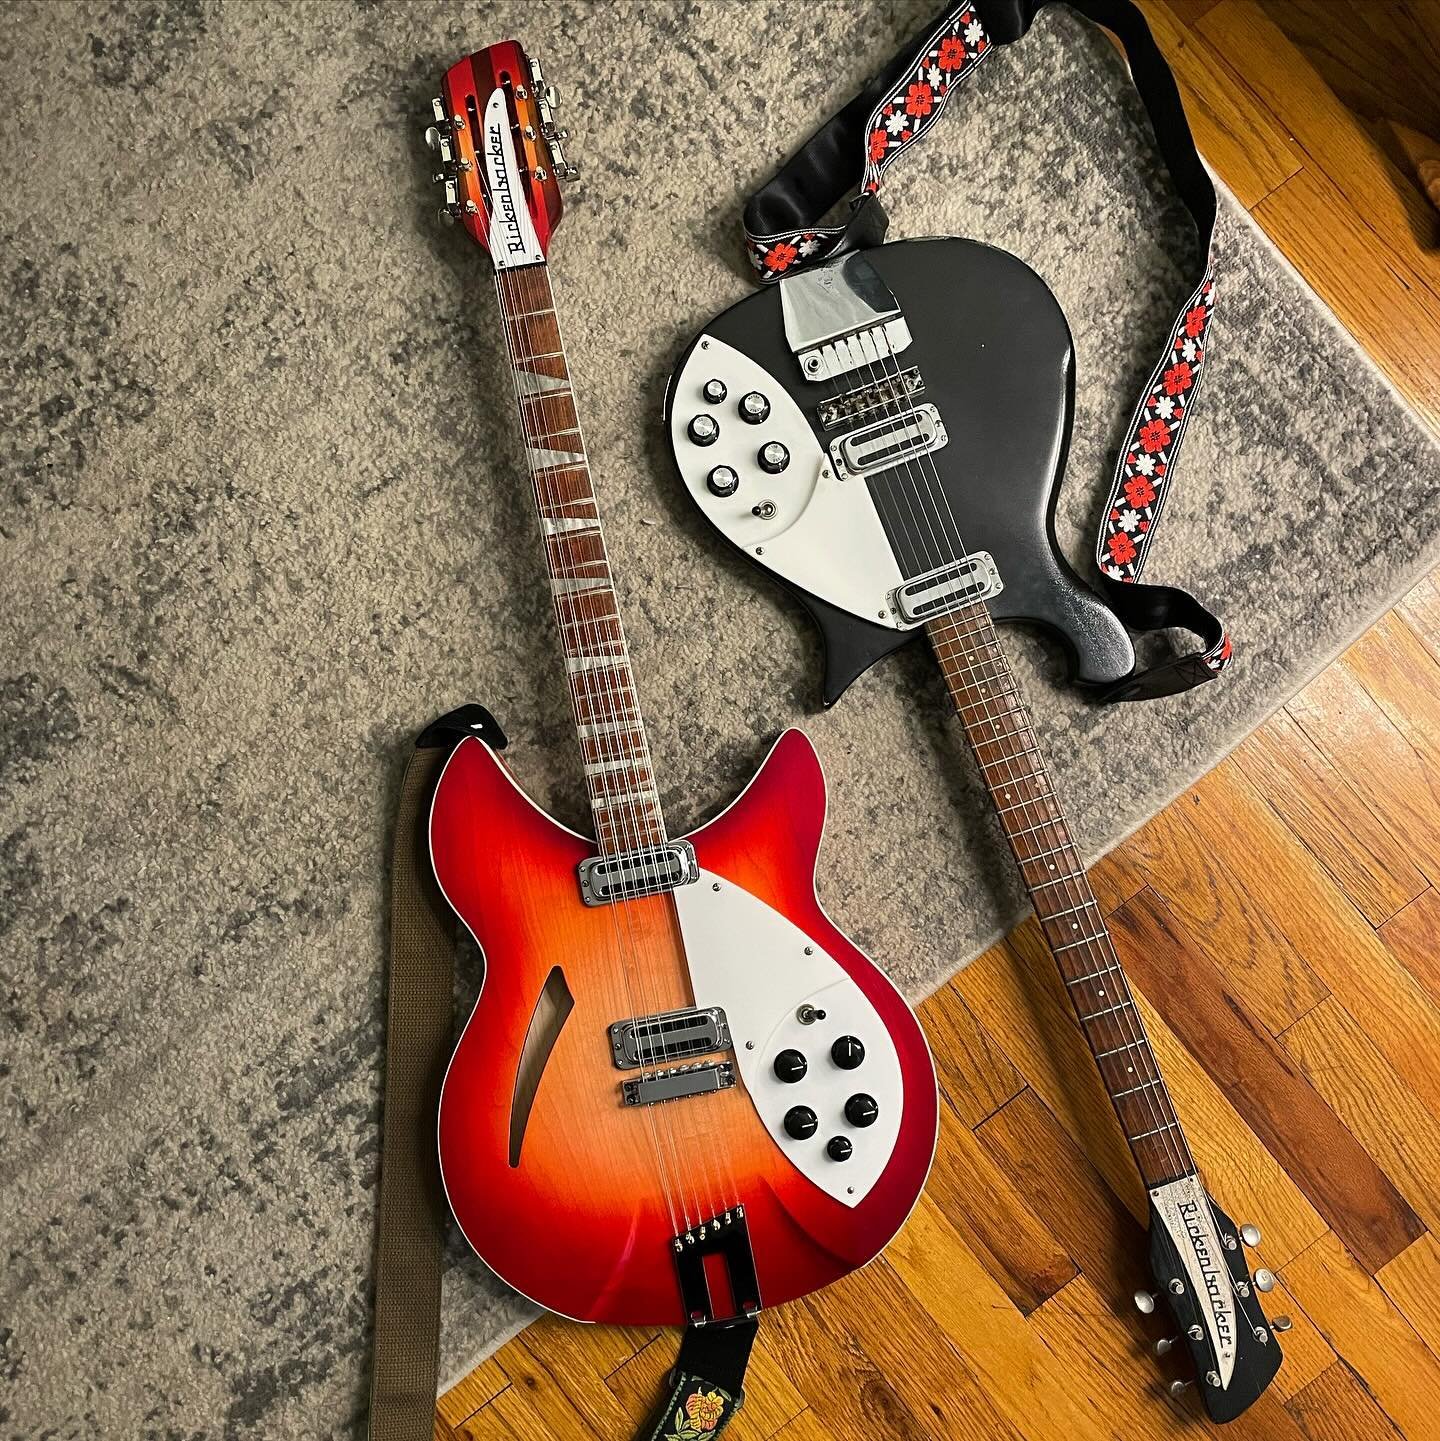 A lot of people tell me I&rsquo;m an old soul, and I can&rsquo;t disagree. In another life I must have been some guy in a band in the mid 60&rsquo;s wielding a Rickenbacker. Something about that feels familiar 🎸🤷🏻&zwj;♂️ 
.
.
.
.
.
.
.
.
.
.
.
.
#